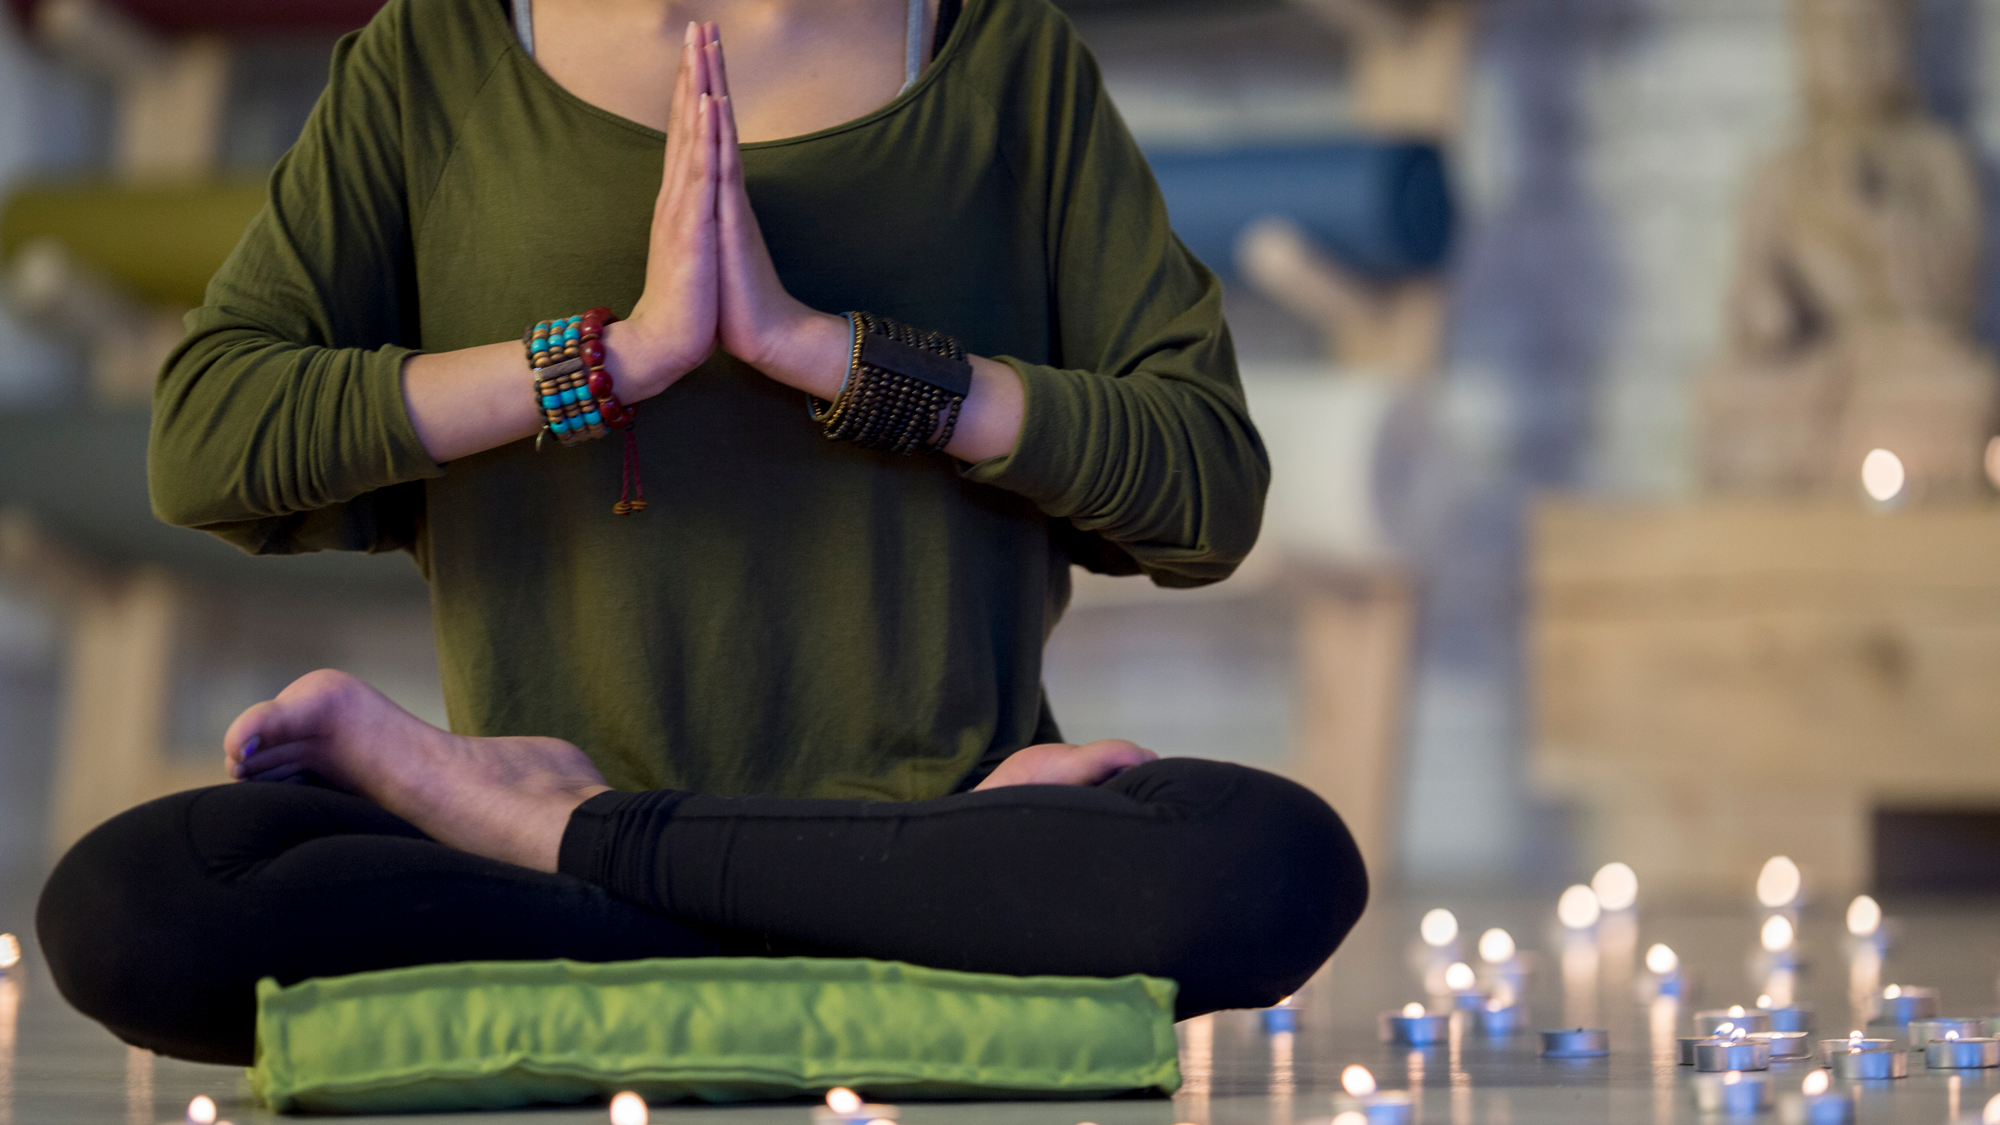 How to use yoga bolsters and Meditation cushions for Meditation